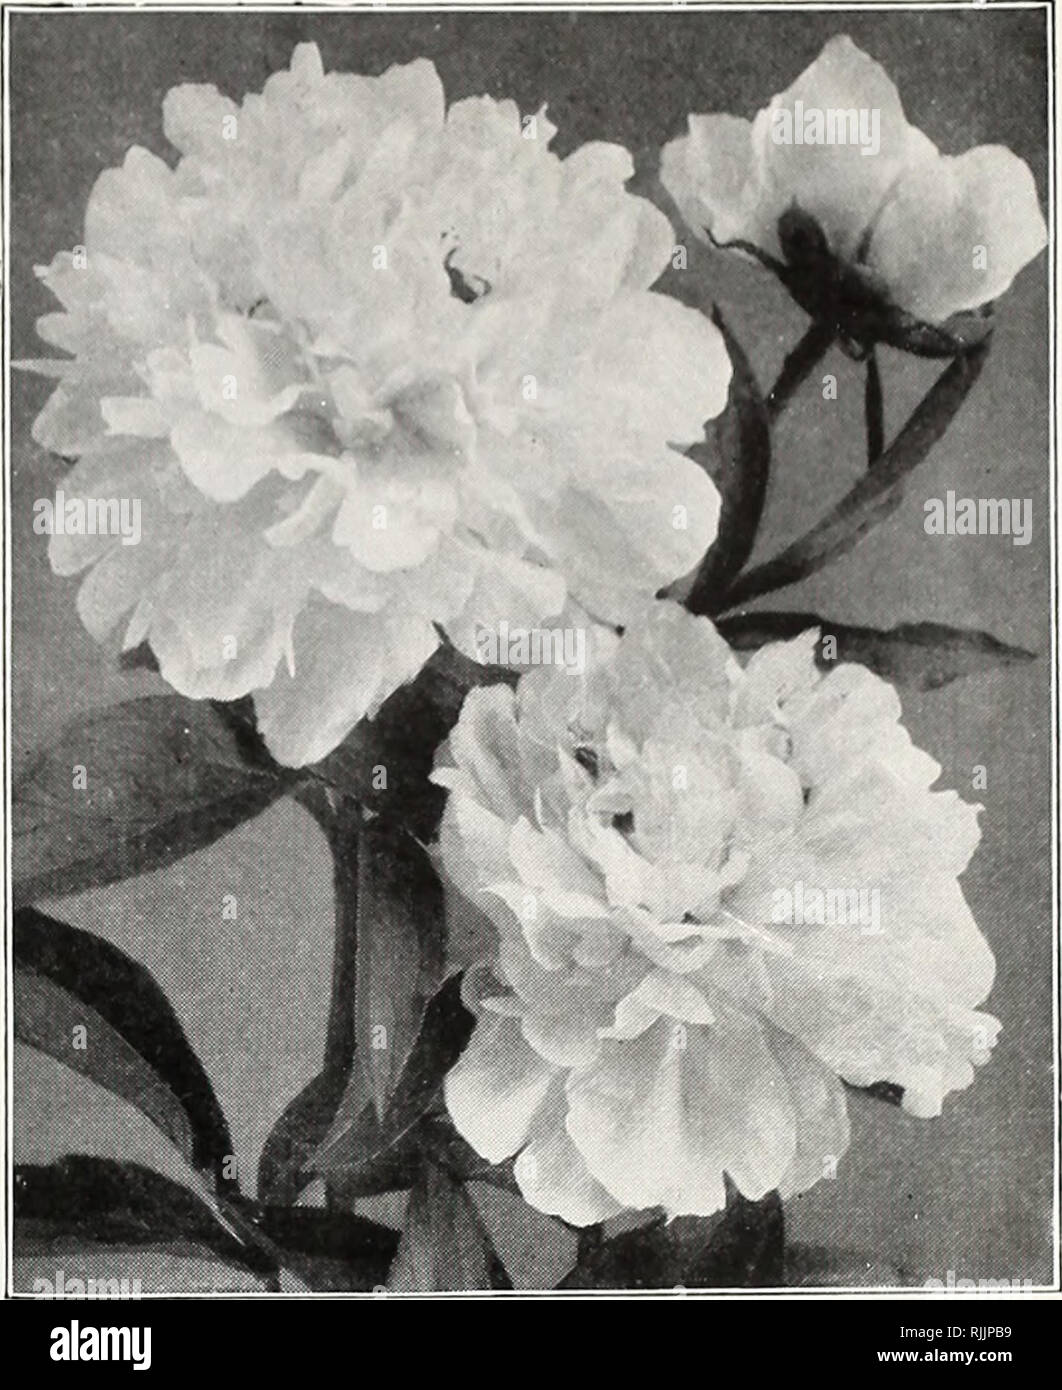 . Beckert's 1921 bulb catalogue. Nurseries (Horticulture) Pennsylvania Pittsburgh Catalogs; Nursery stock Pennsylvania Pittsburgh Catalogs; Vegetables Seeds Pennsylvania Pittsburgh Catalogs; Flowers Seeds Pennsylvania Pittsburgh Catalogs; Bulbs (Plants) Pennsylvania Pittsburgh Catalogs. Peony, Festiva Maxima PEONIES K^^S Those who are lond of Peonies will be delighted with these modern marvels which the skill of the hybridizer has given us. Plant them in good, deep, rich soil so that the crown of the plant is about 2 inches below surface. Mailing weight, 16 ozs. each root AVALANCHE. Immense; s Stock Photo